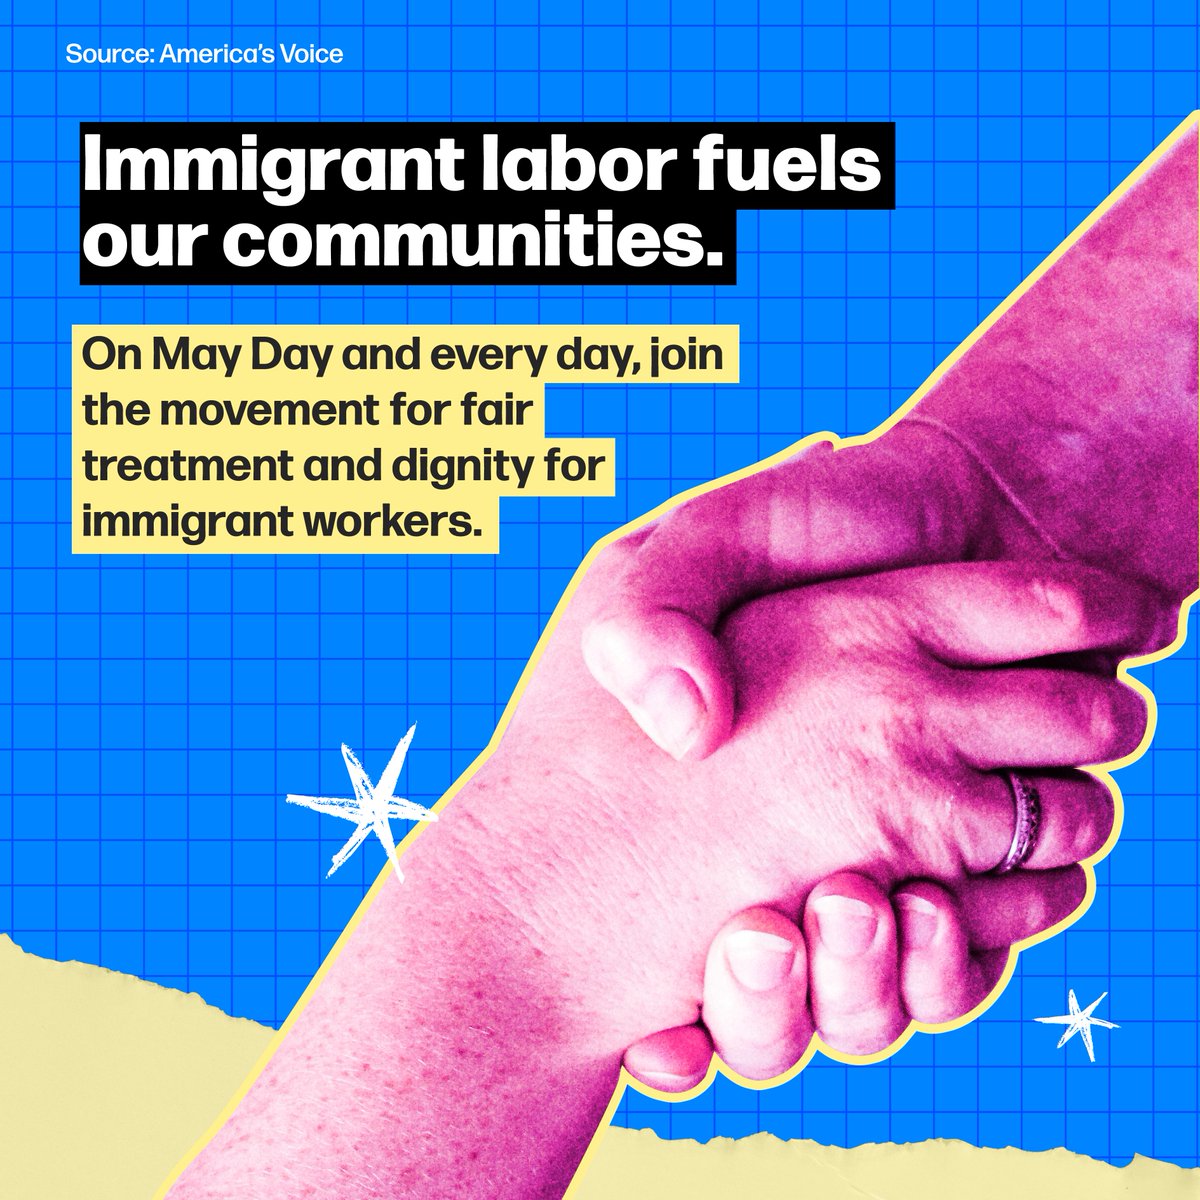 Immigrant labor powers our communities, yet too often their contributions go unrecognized. This #MayDay, let's honor their contributions by advocating for fair treatment and dignity in the workplace. Join the movement for immigrant rights. #workers #ImmigrantsAreEssential